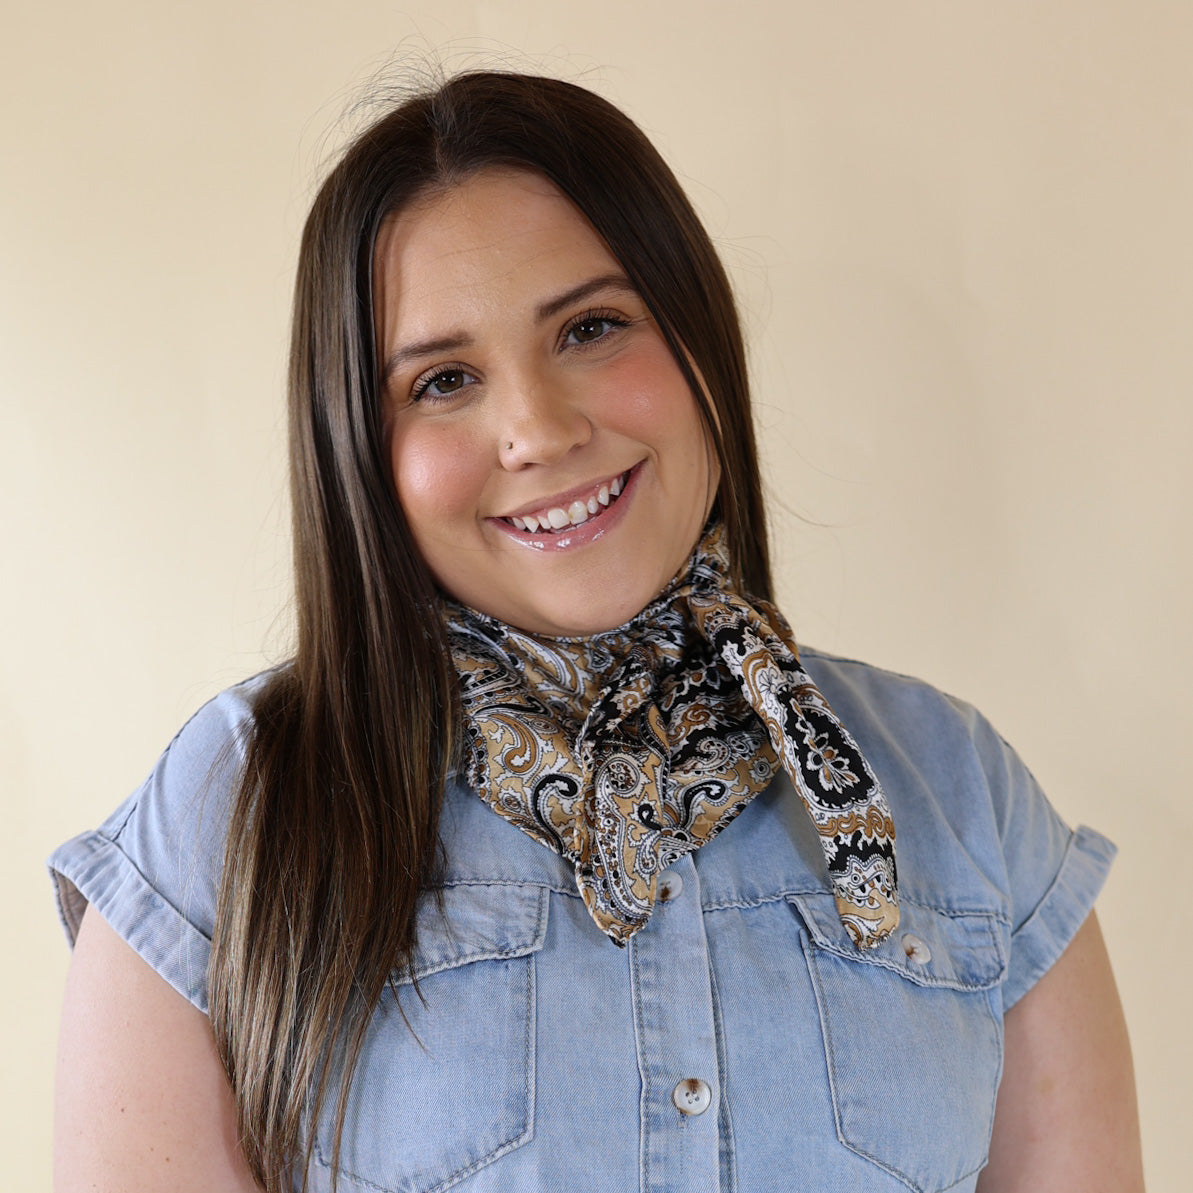 Brunette model is pictured wearing a denim button up top and a tan and black mix paisley printed scarf tied around her neck. She is pictured in front of a beige background. 